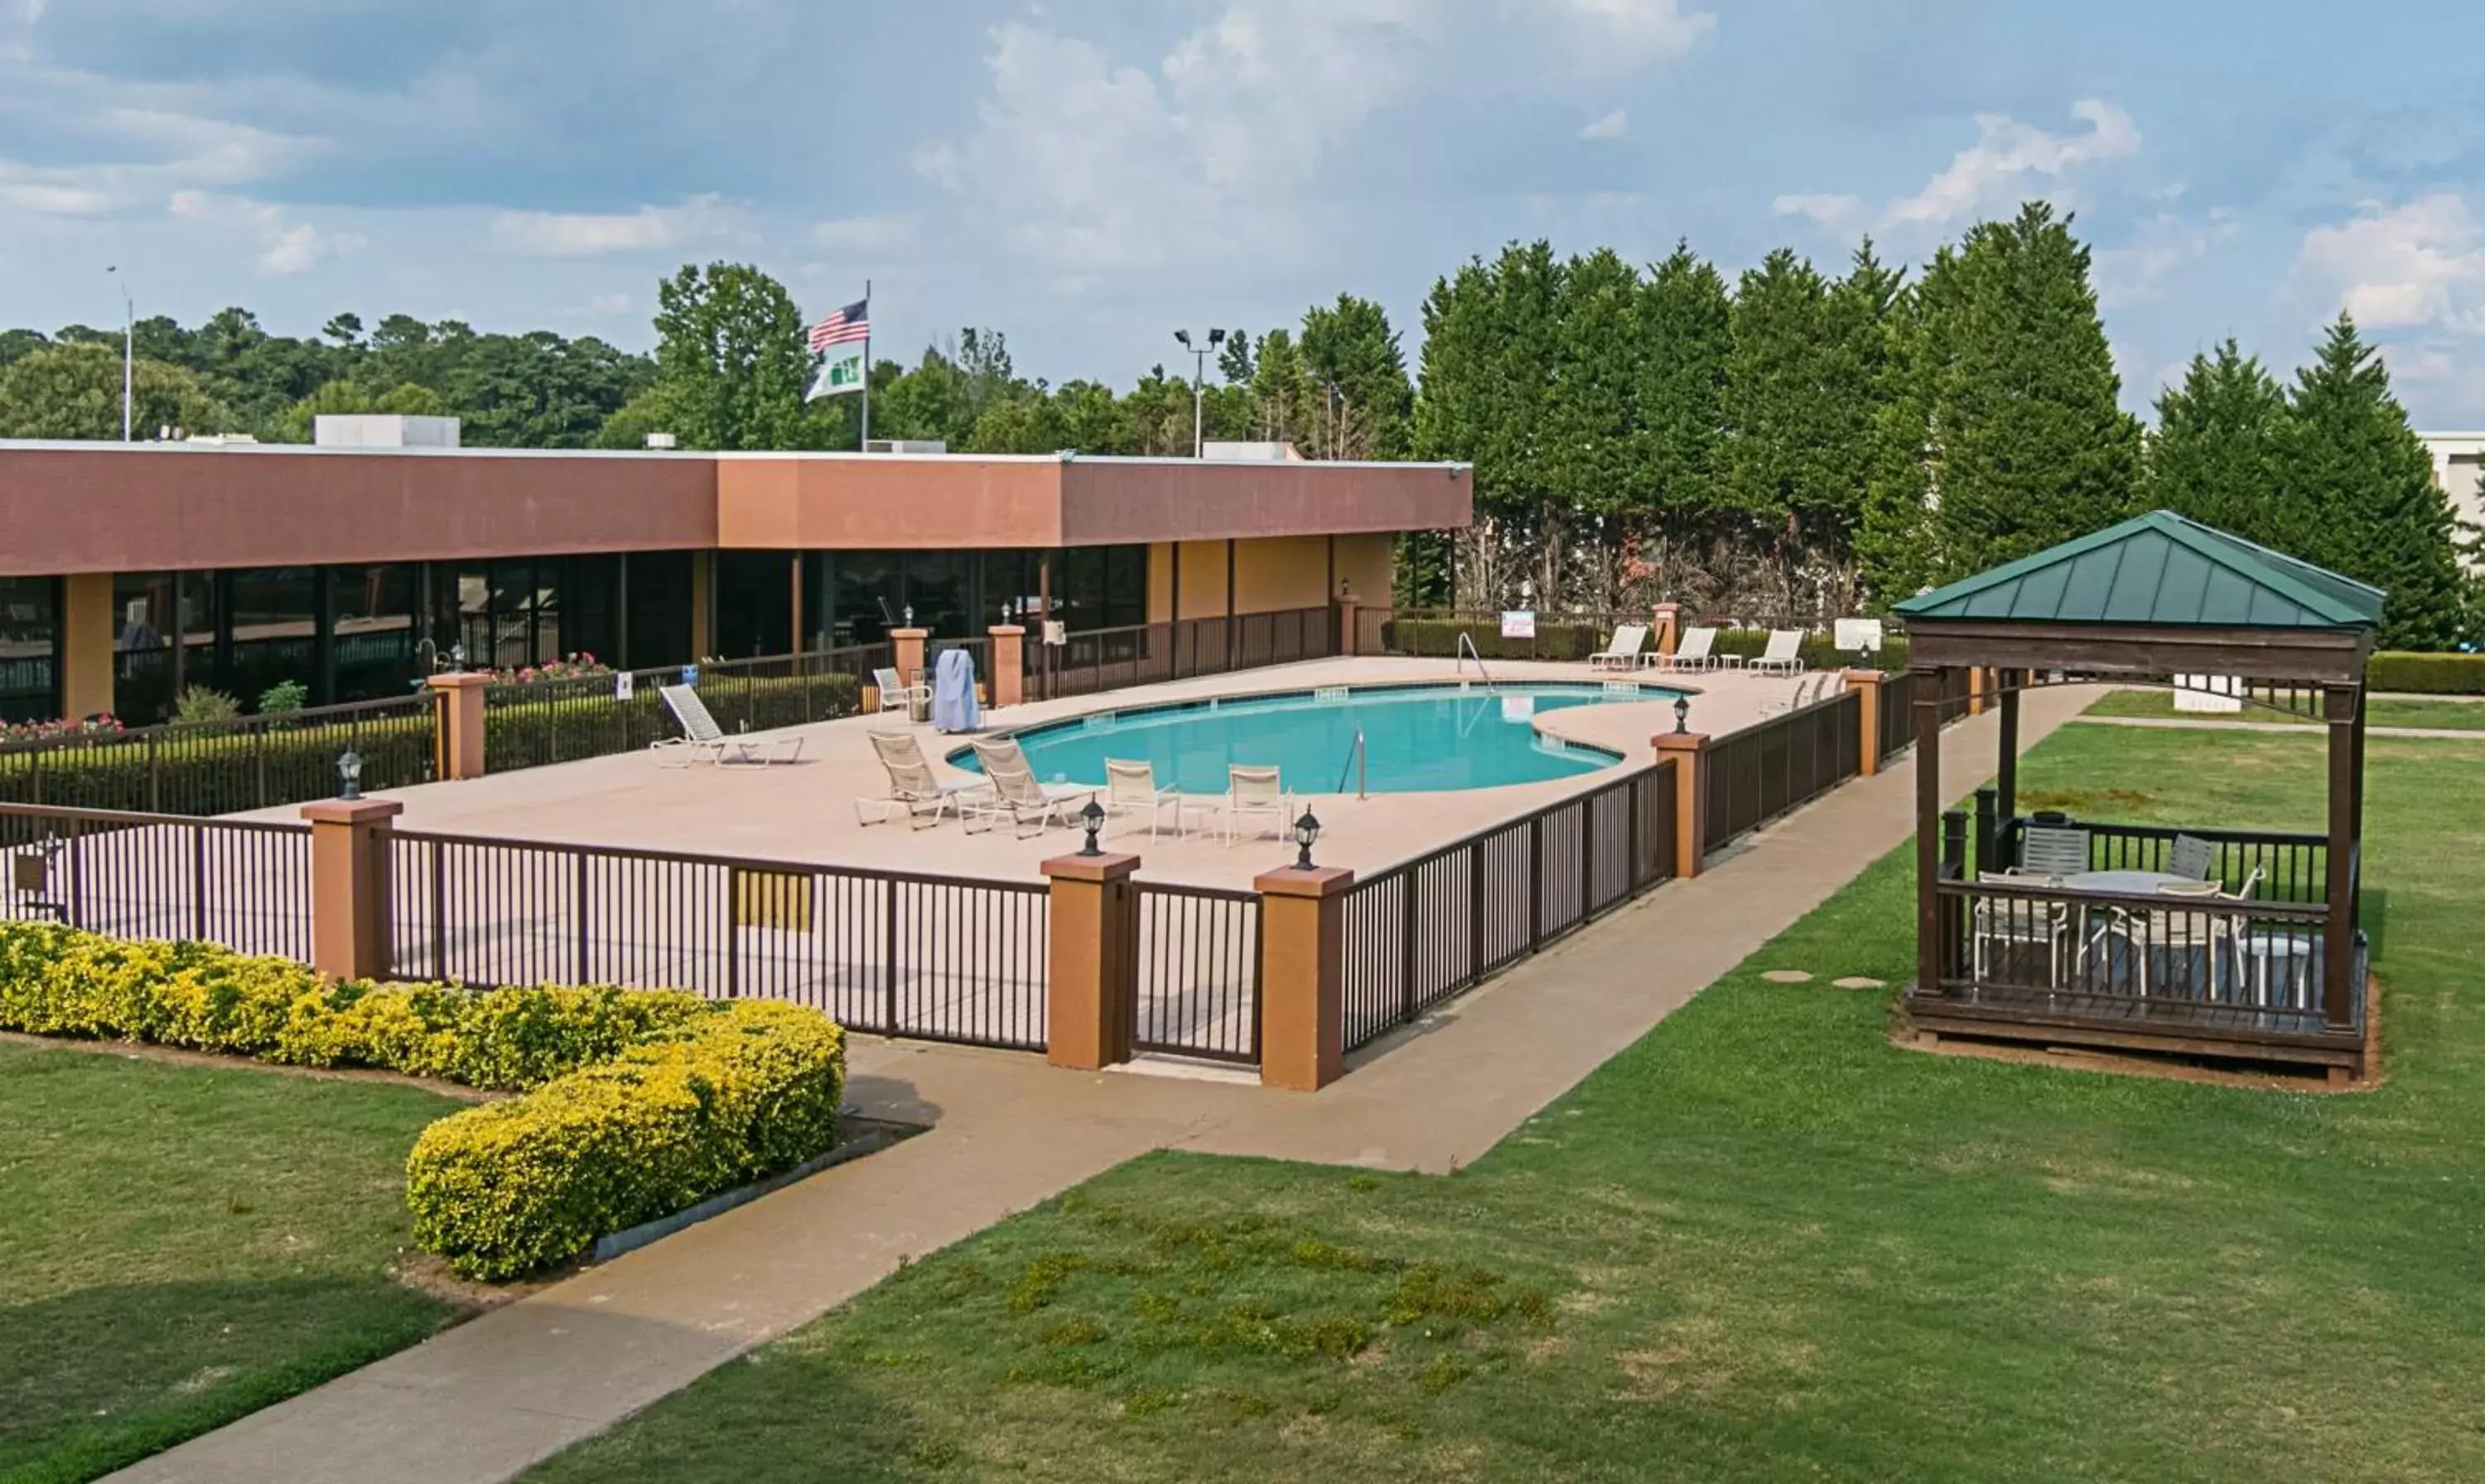 Property building, Swimming Pool in Red Roof Inn Forsyth